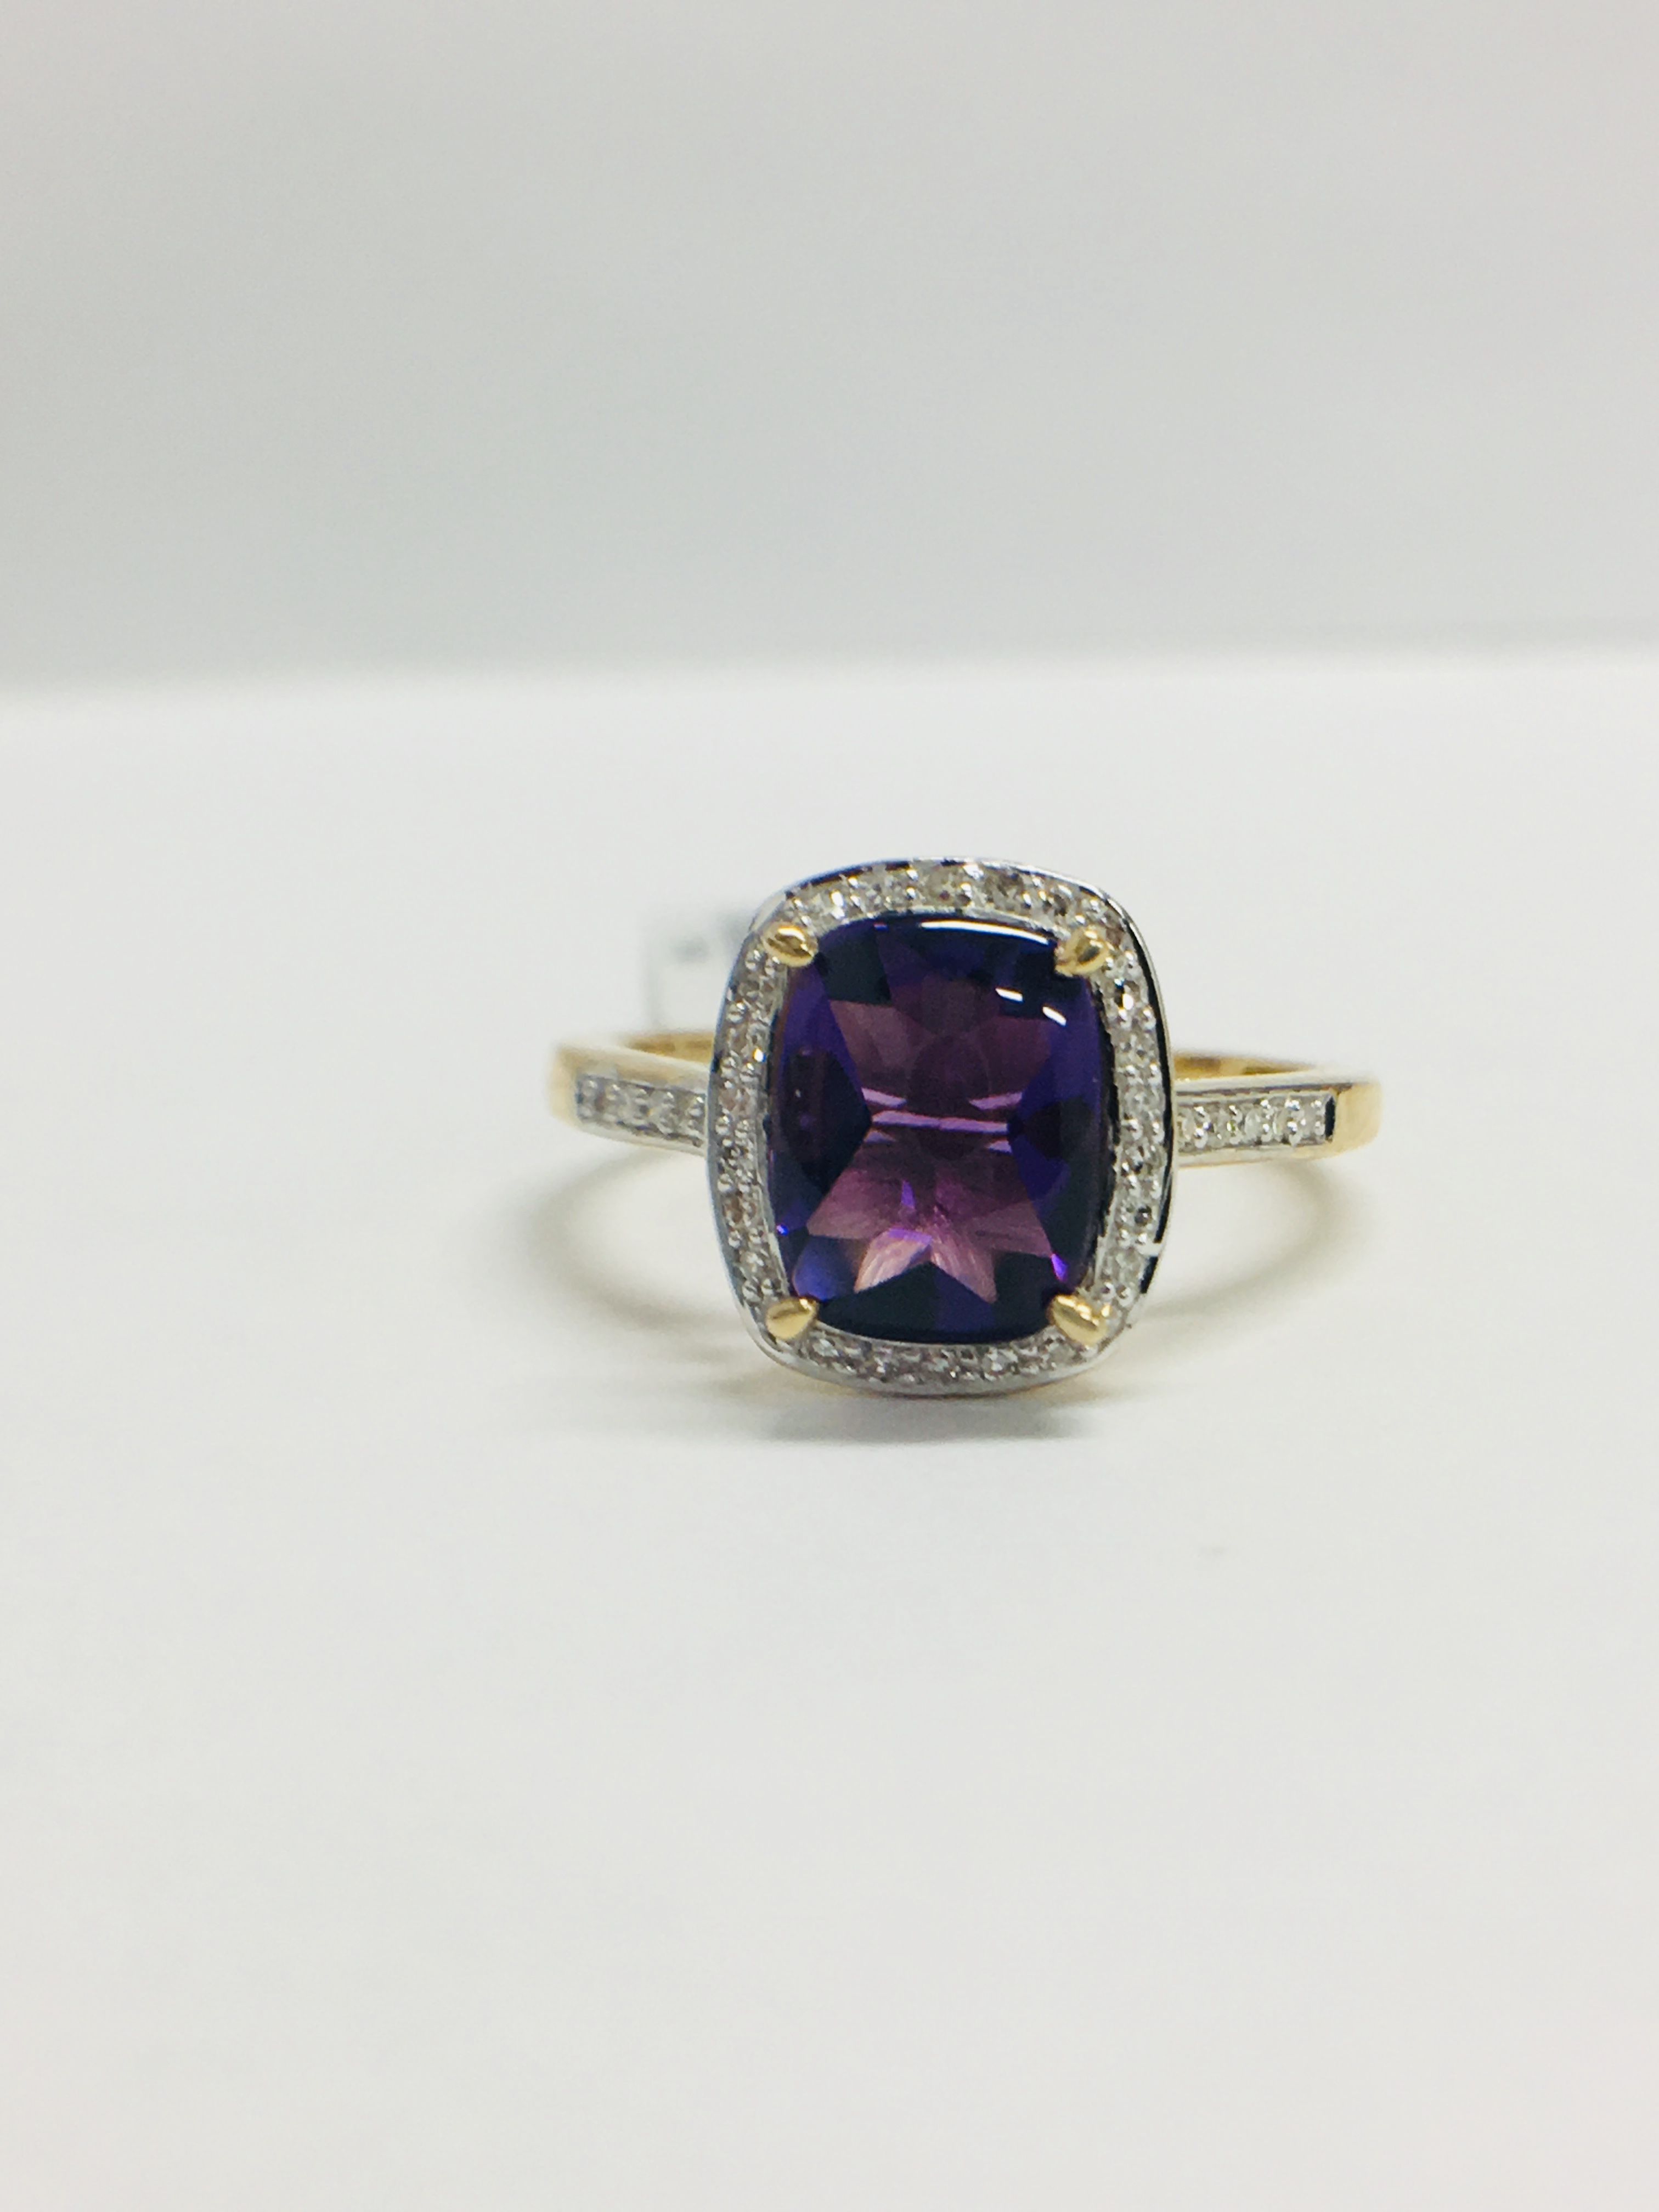 9ct yellow gold Amethyst and diamond ring